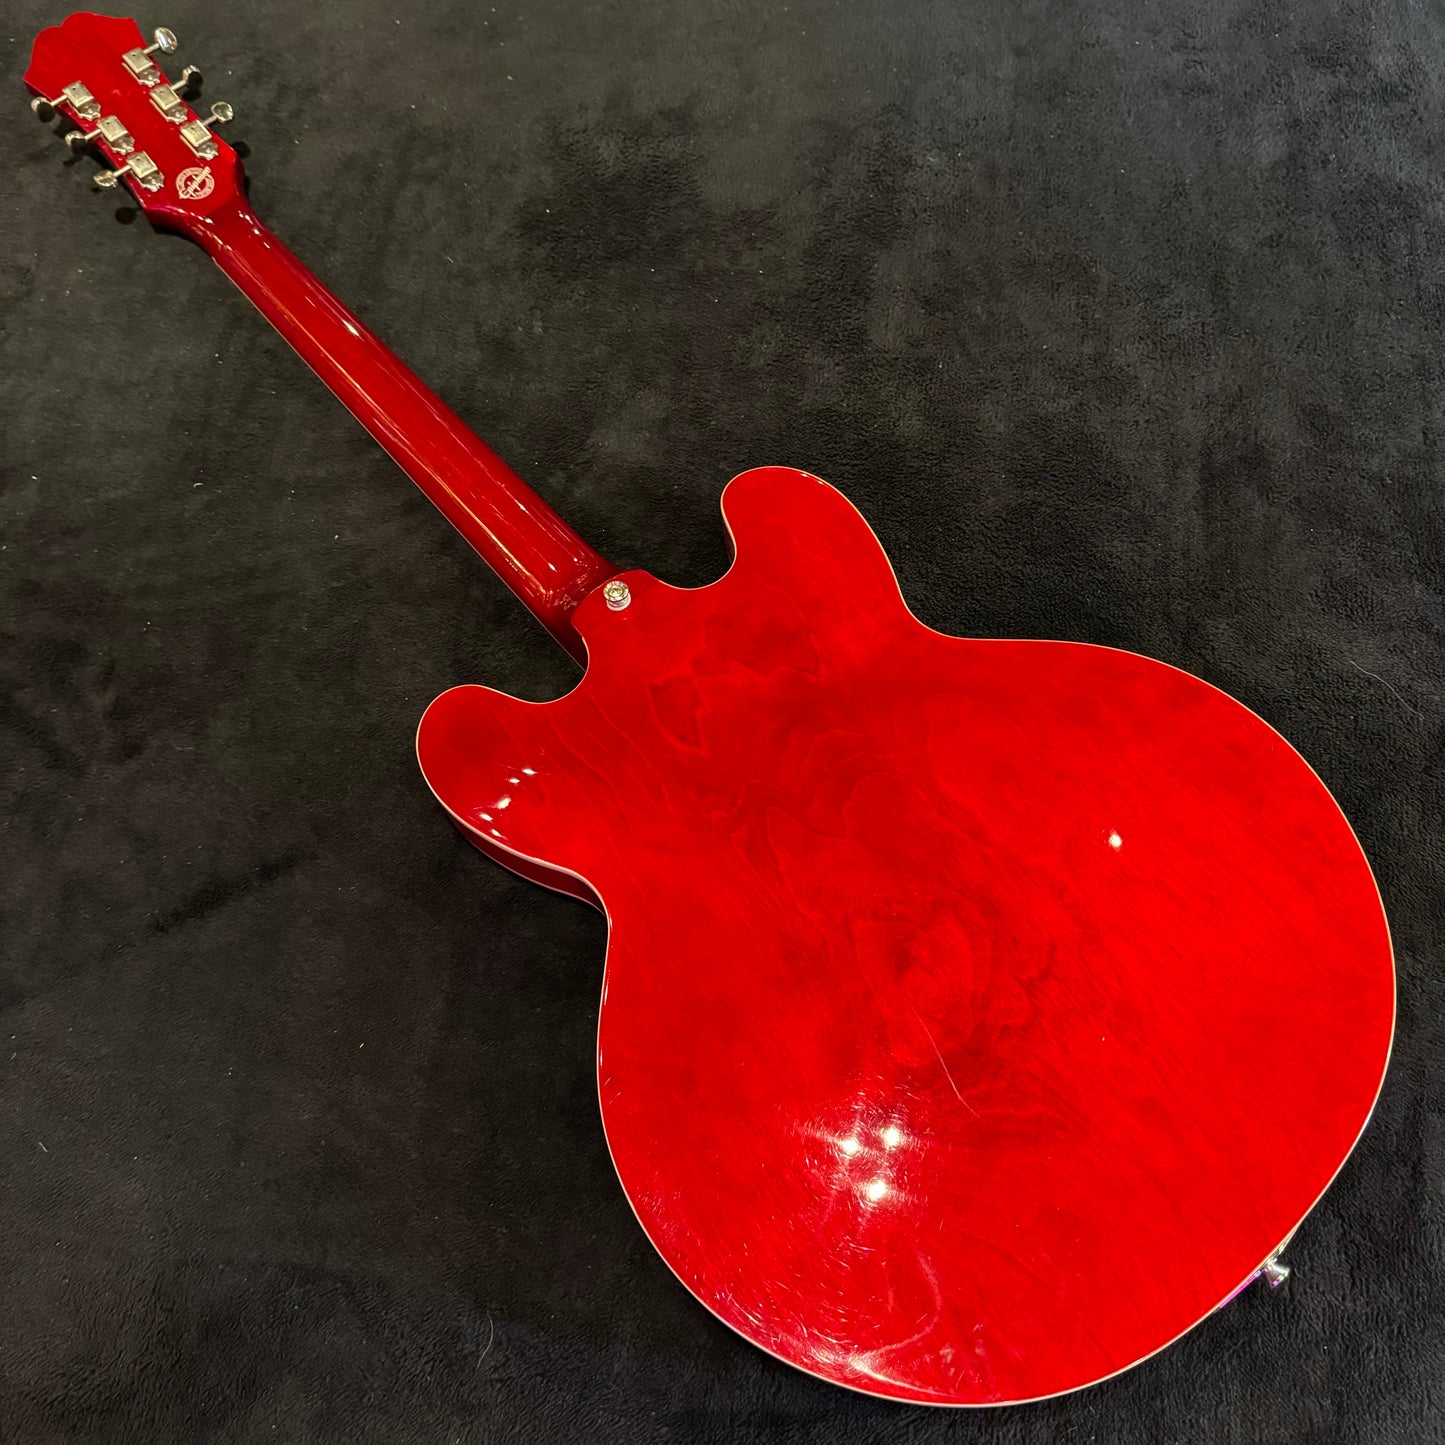 Epiphone Riviera Cherry Limited Edition